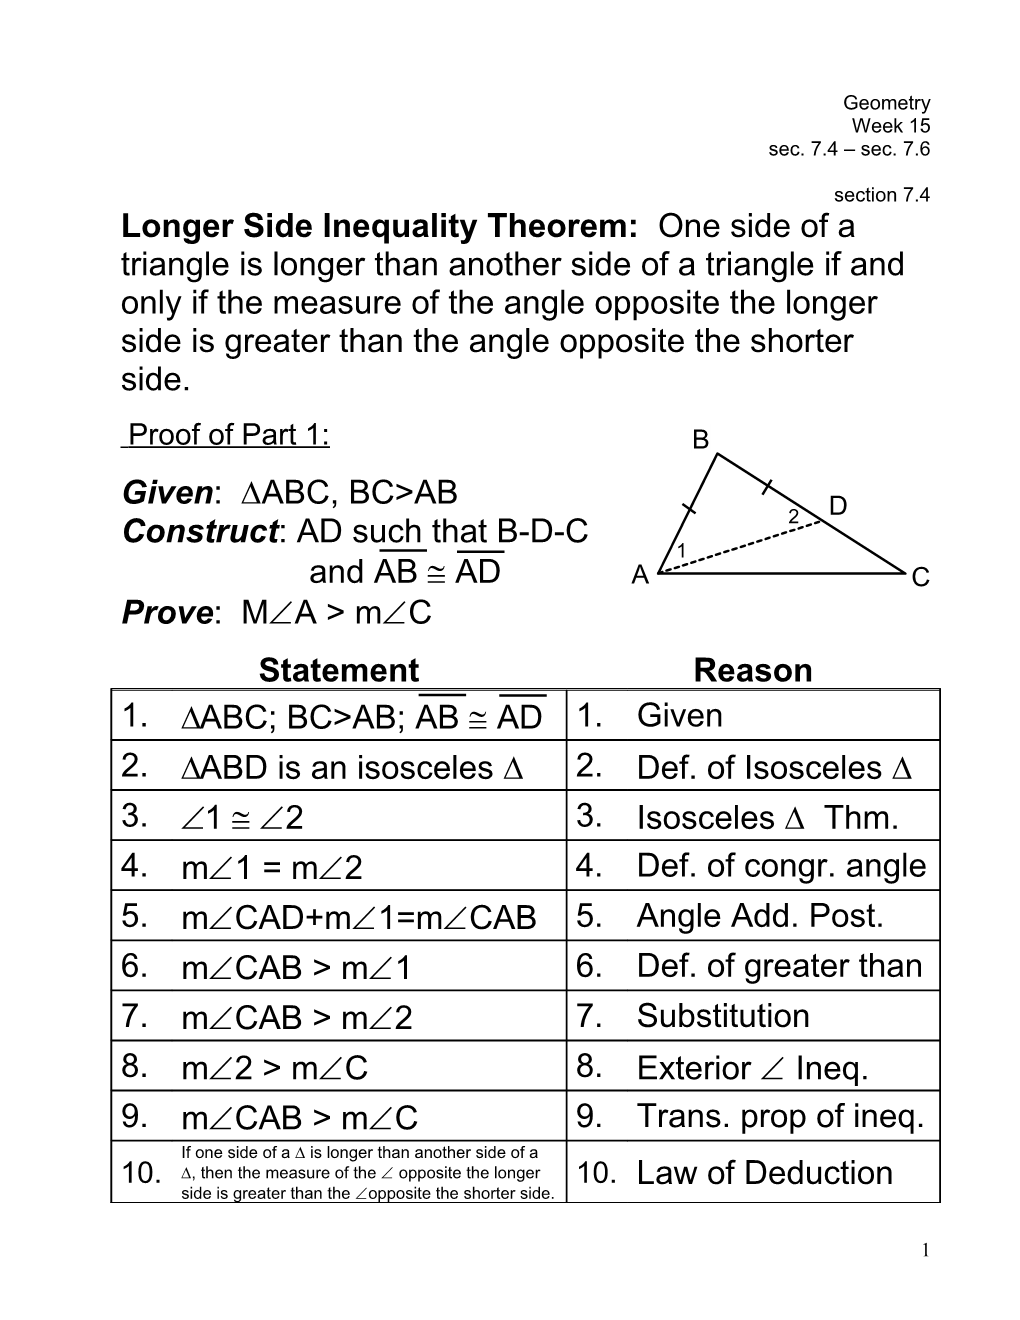 Longer Side Inequality Theorem: One Side of a Triangle Is Longer Than Another Side Of